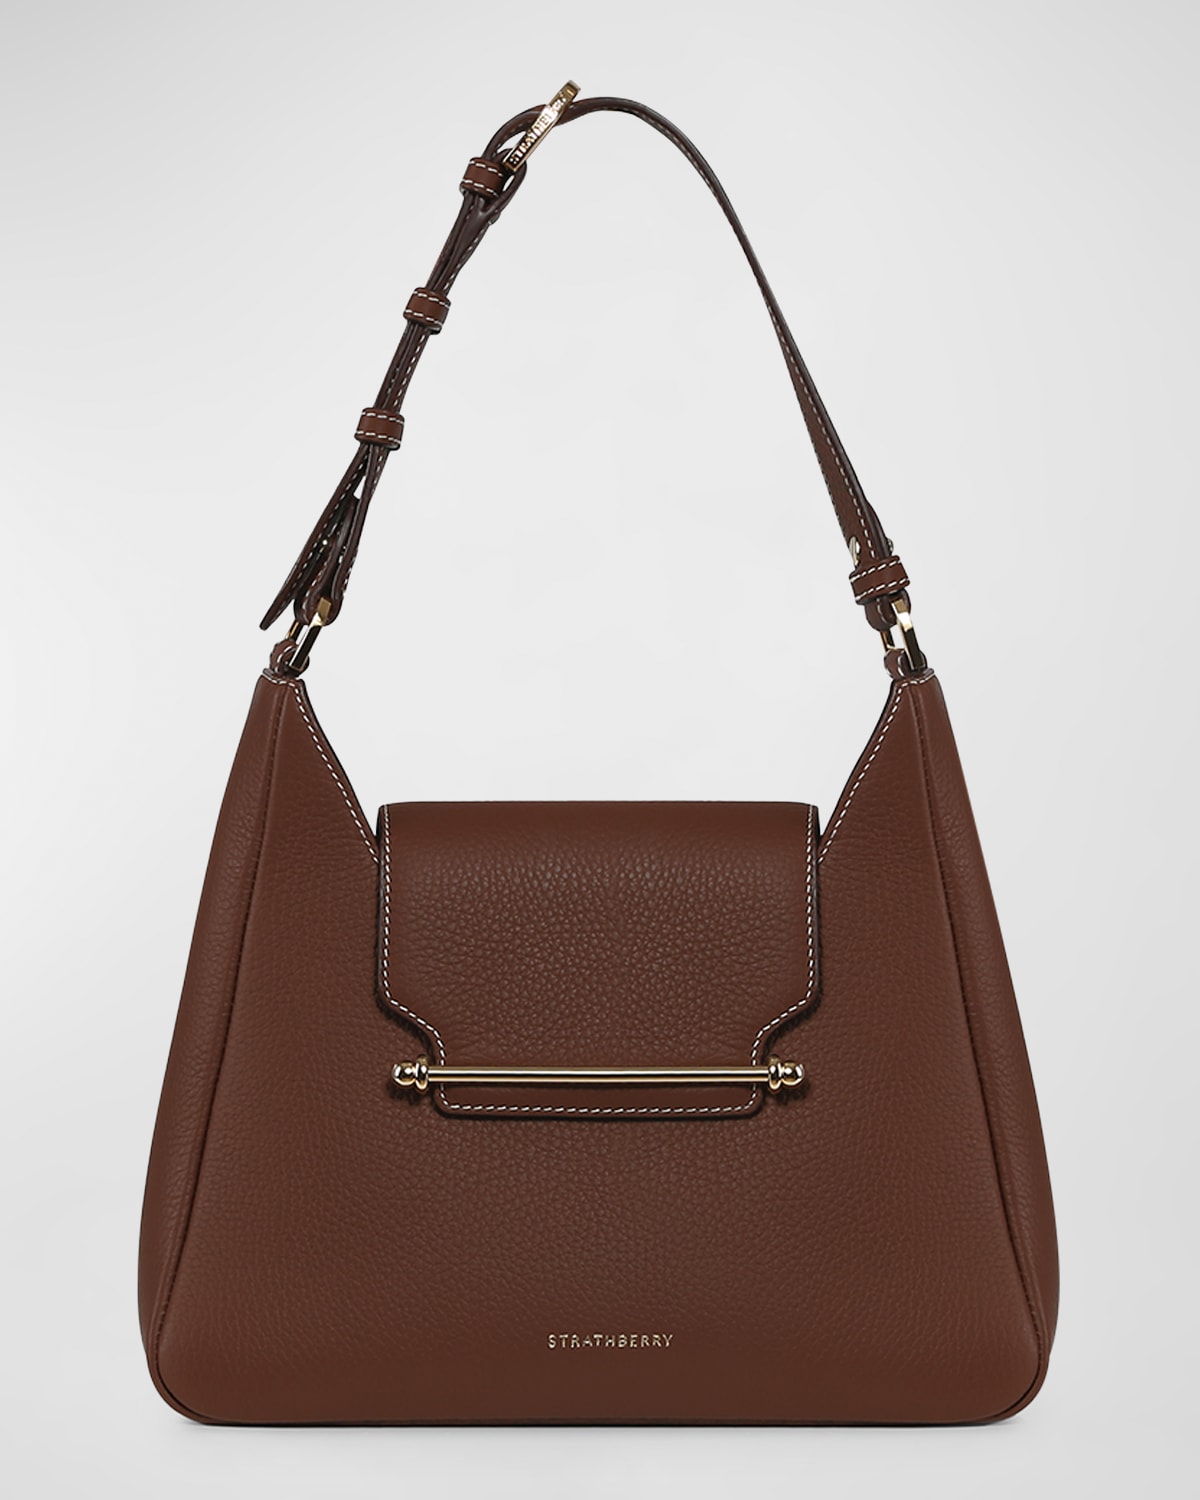 Strathberry Multrees Hobo Bag In Chocolate/gold